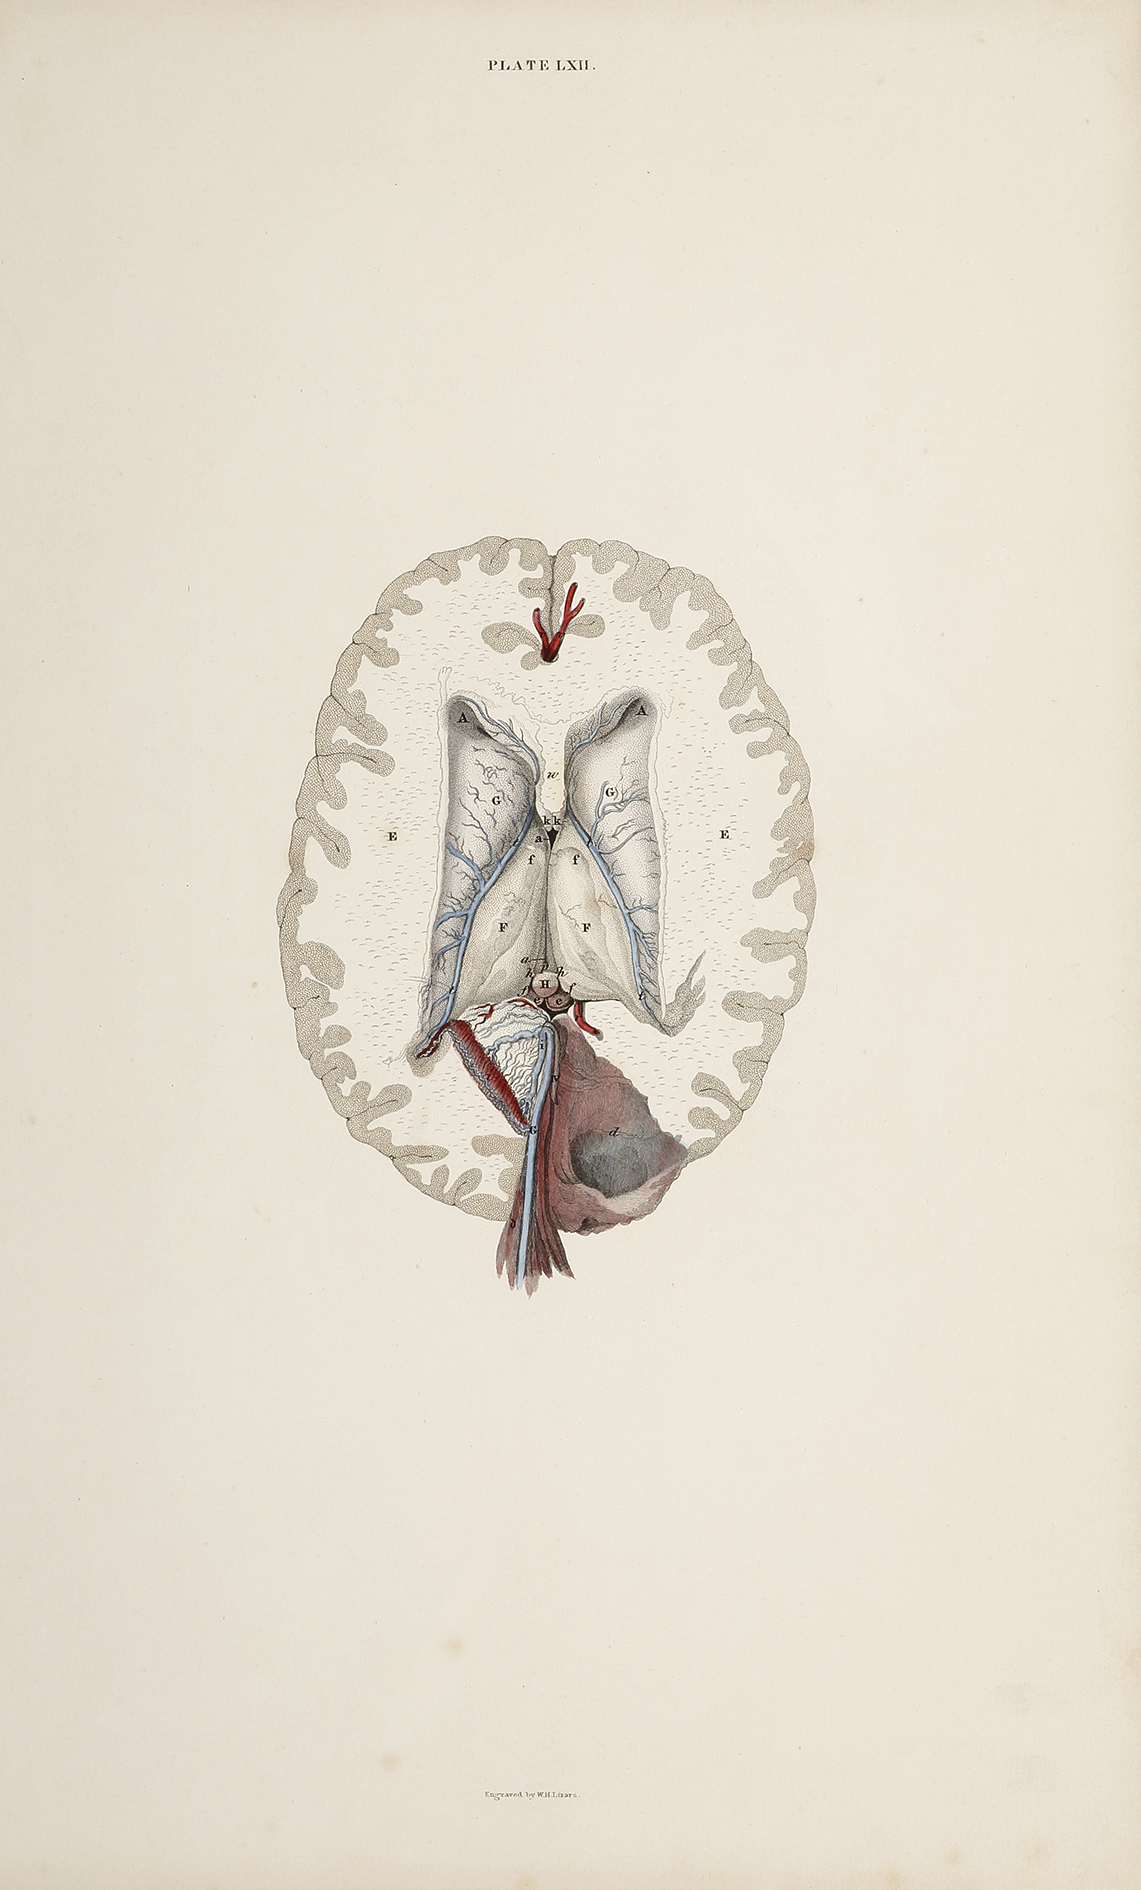 [BRAIN] Dissection of the brain - Antique Print from 1826